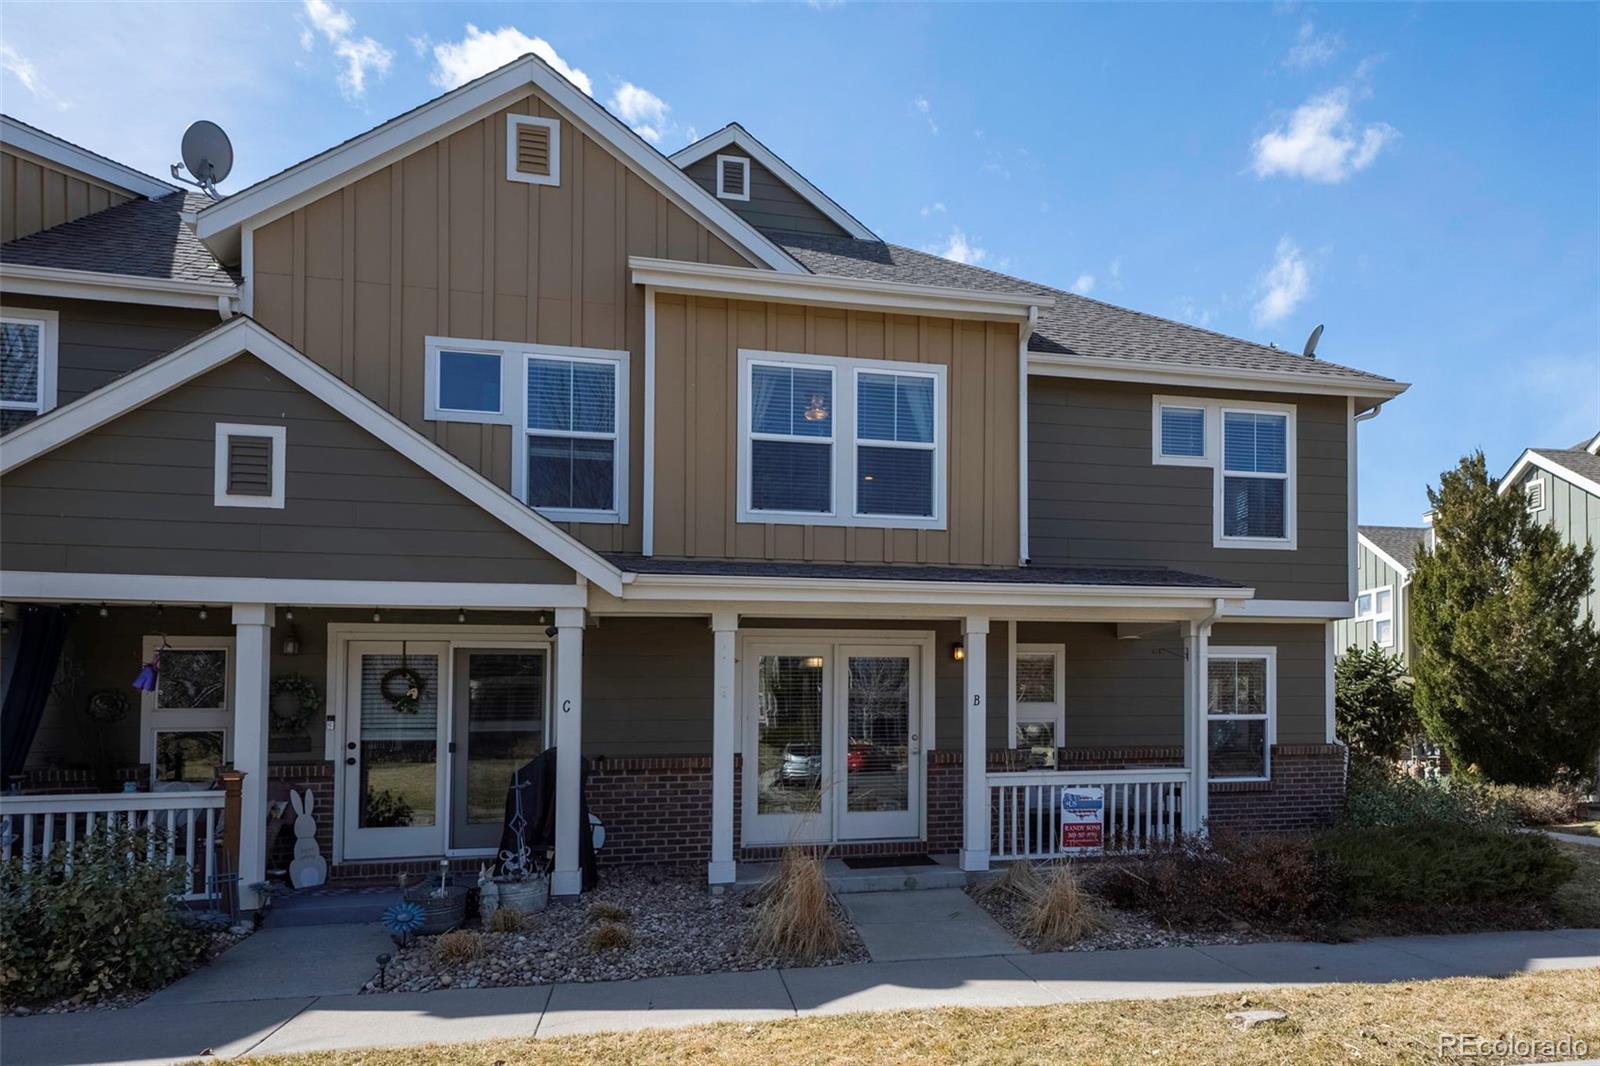 Report Image for 11944  Oak Hill Way,Commerce City, Colorado